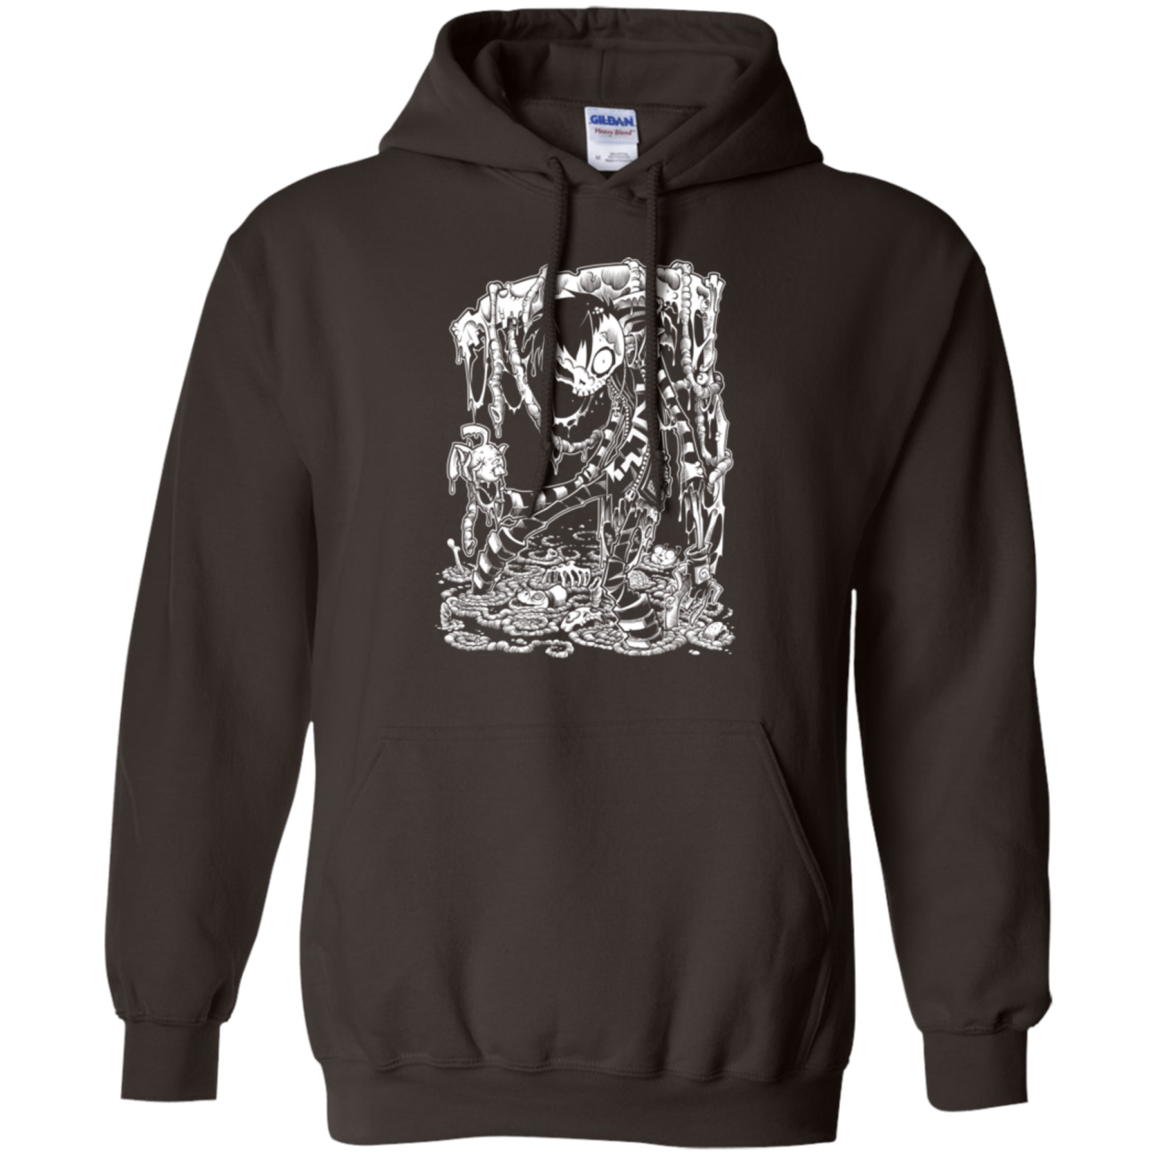 Zombnny Pullover Hoodie